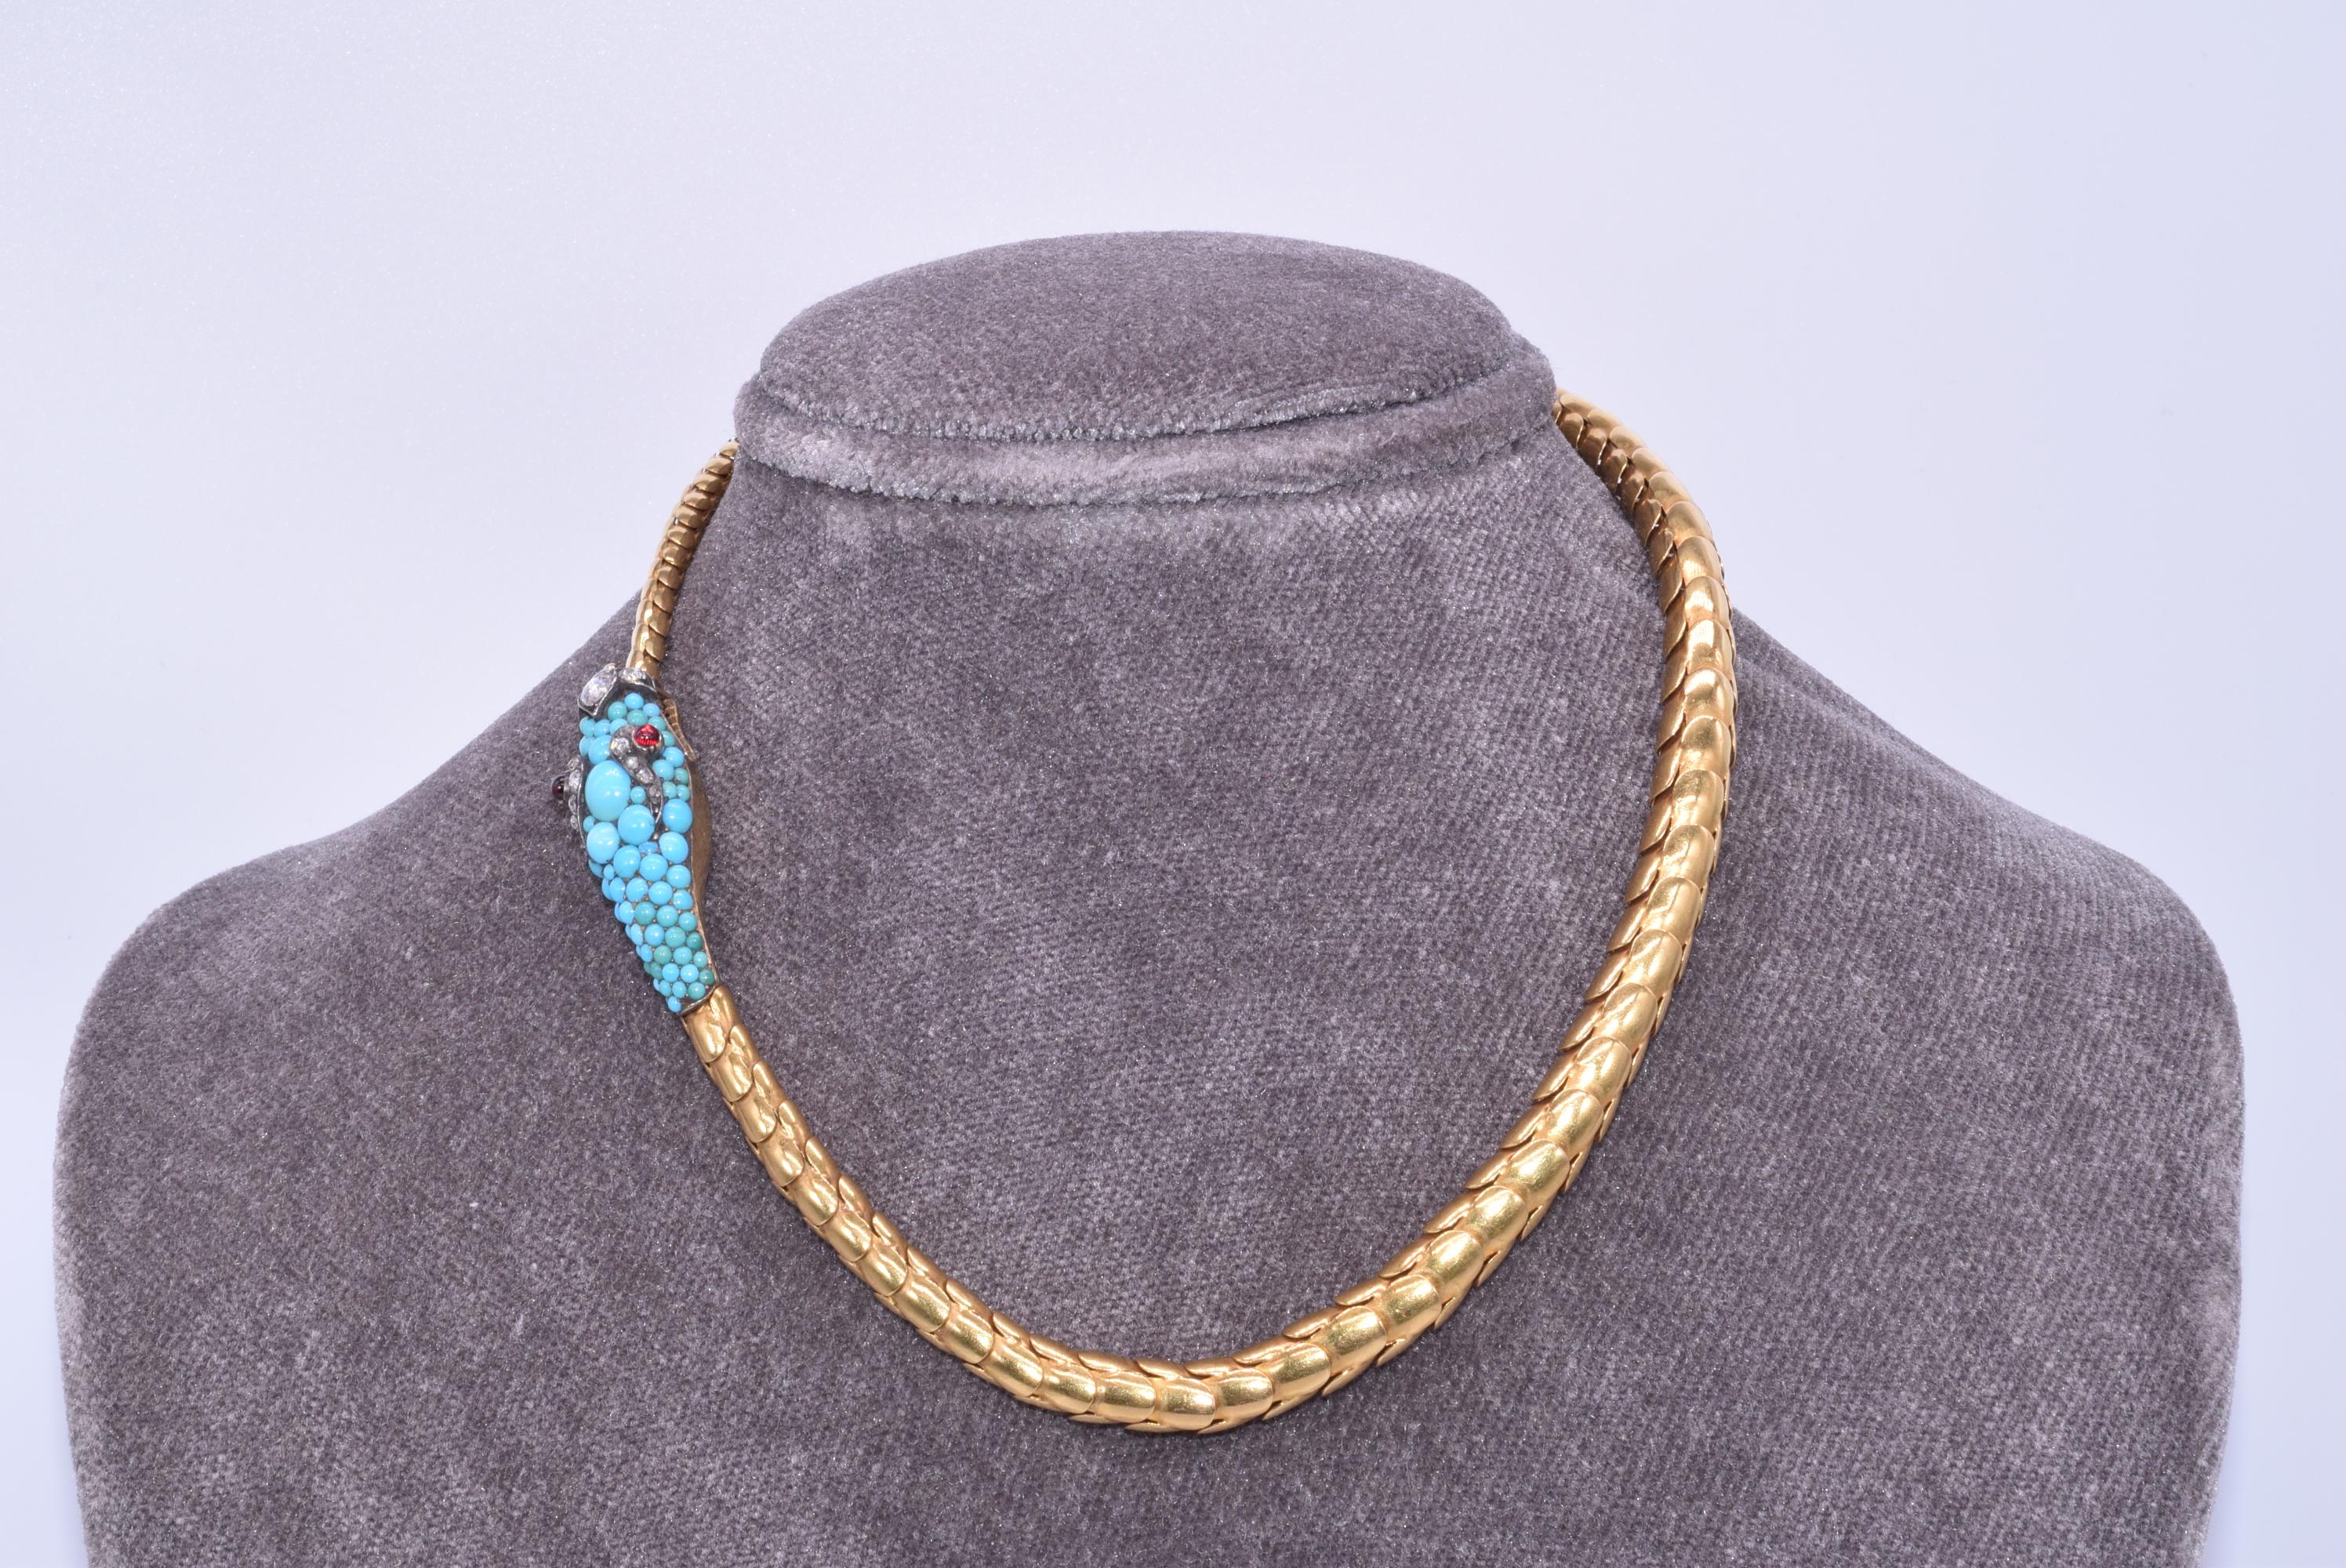 Victorian Convertible Antique Yellow Gold and Turquoise Snake Necklace, circa 1870s